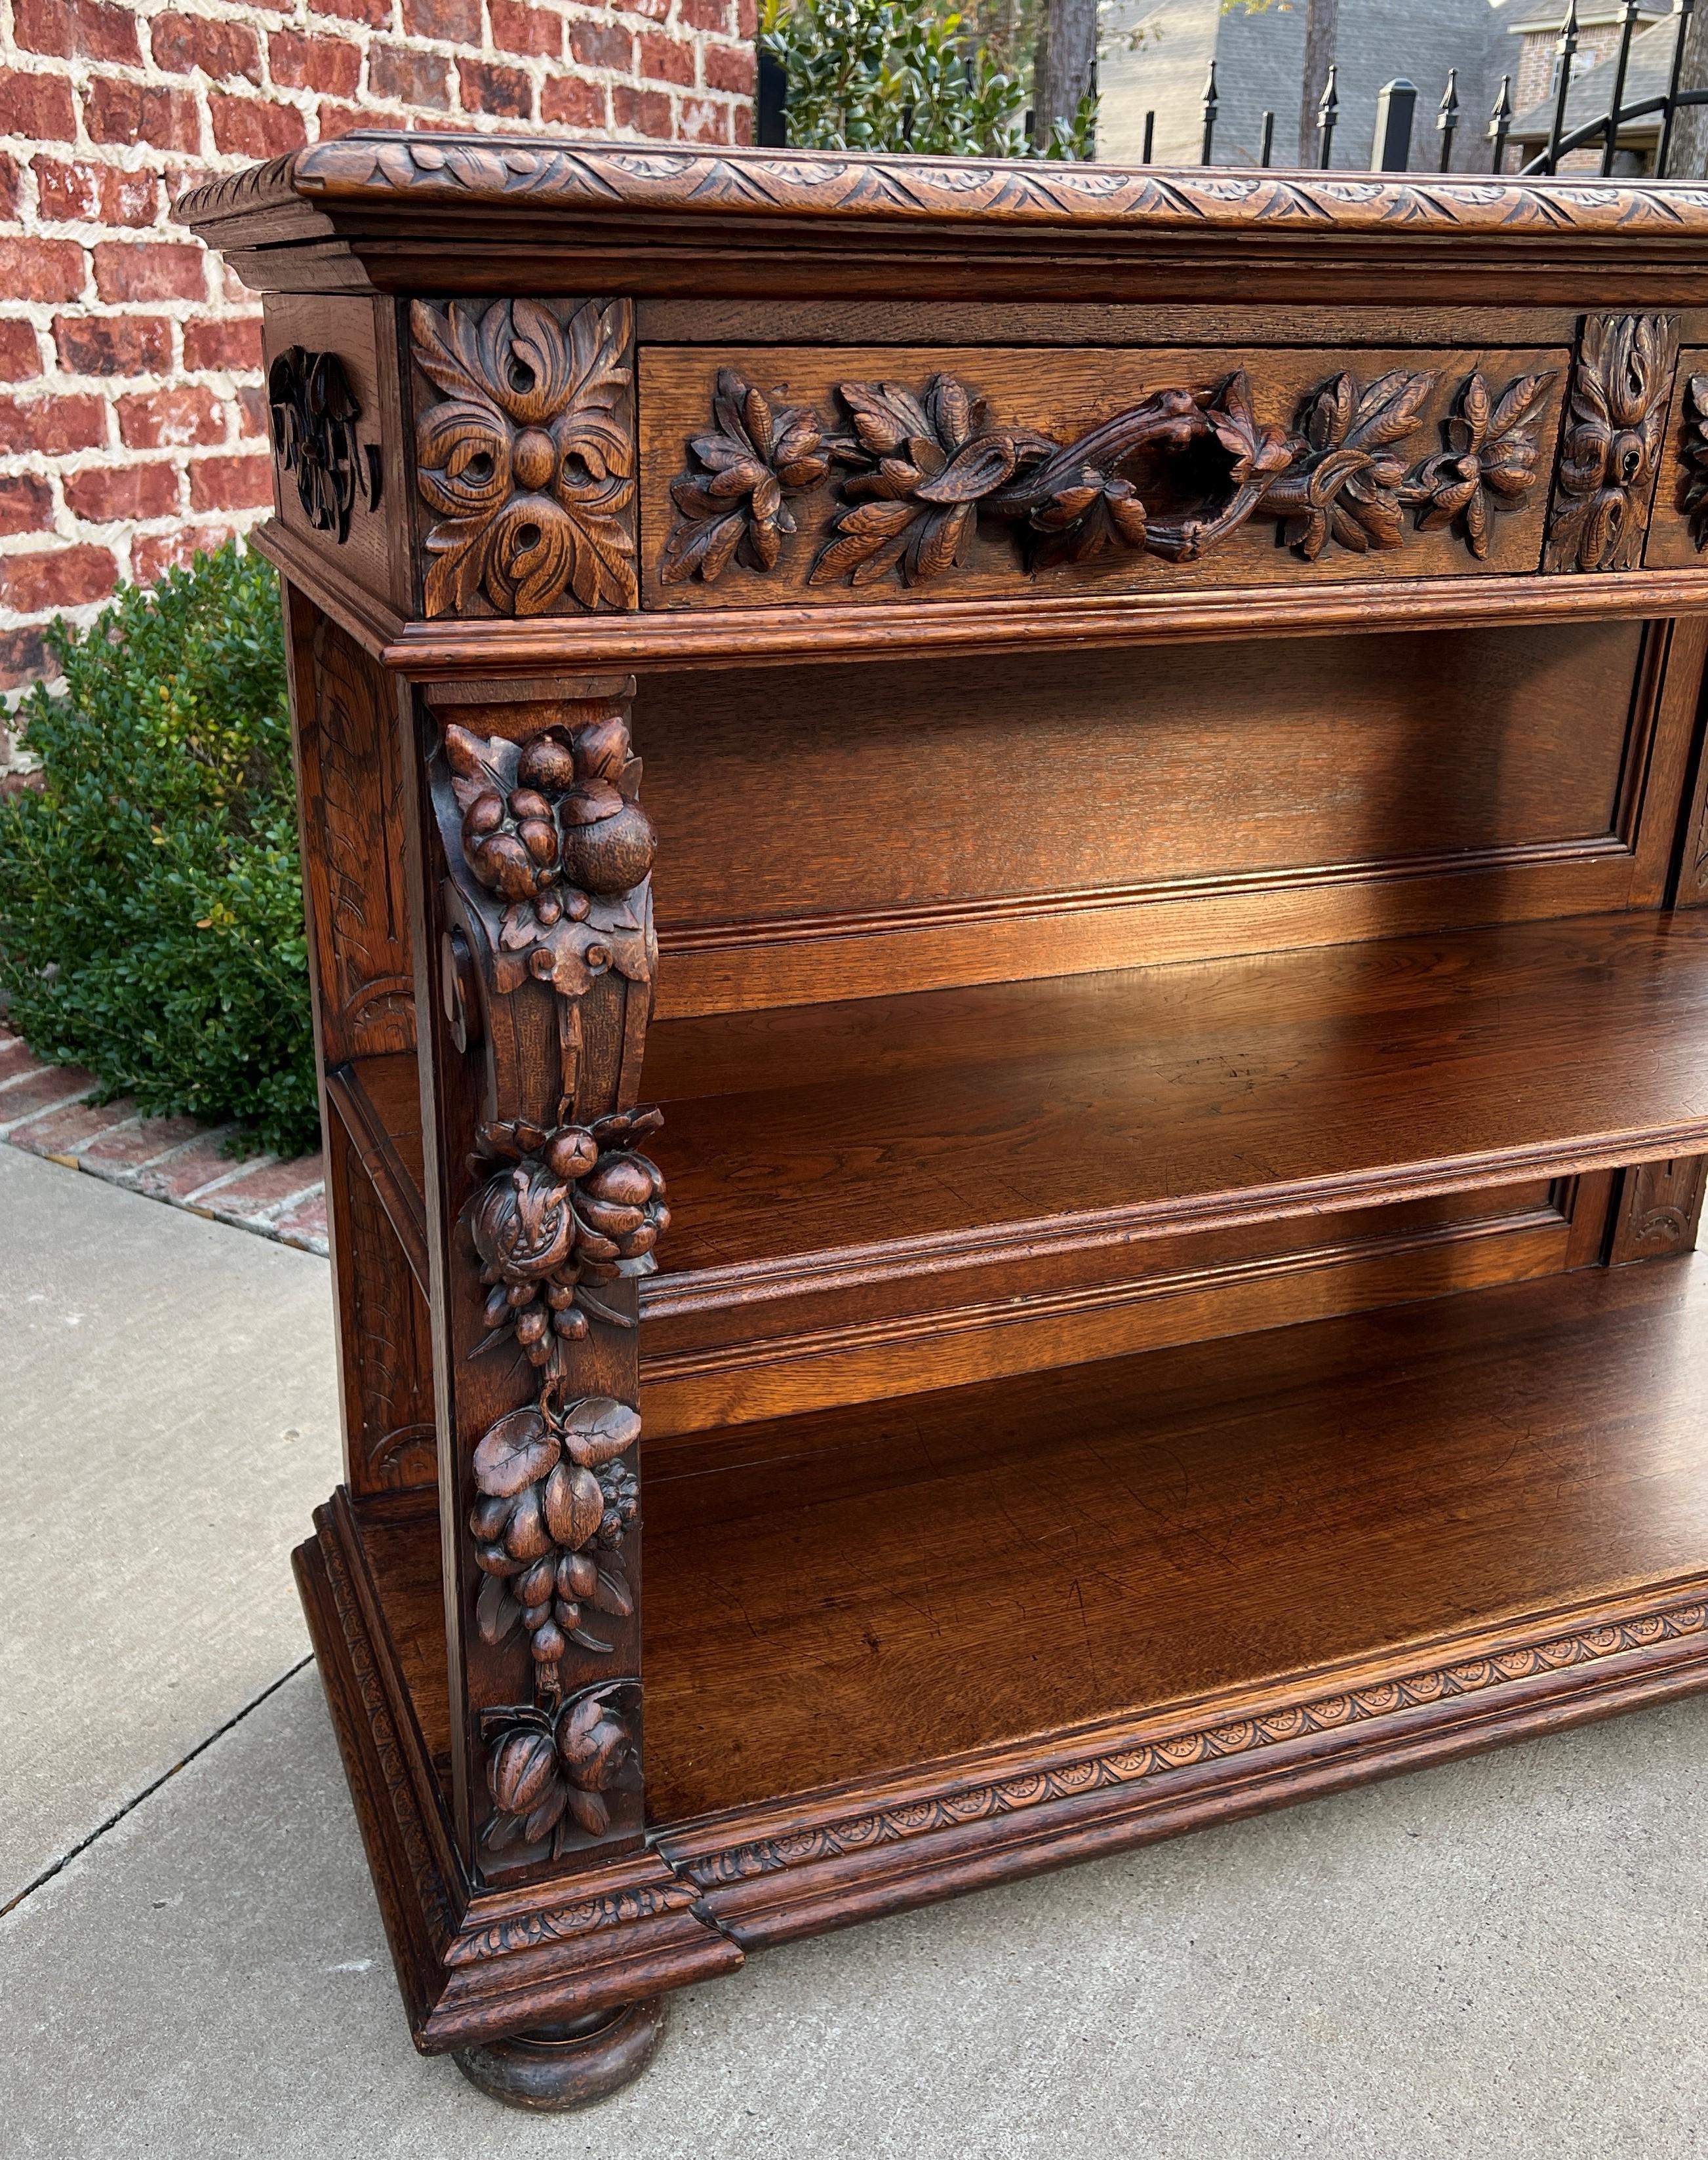 Antique French Server Sideboard Console Sofa Table 3-Tier Drawers Carved Oak 19c For Sale 7